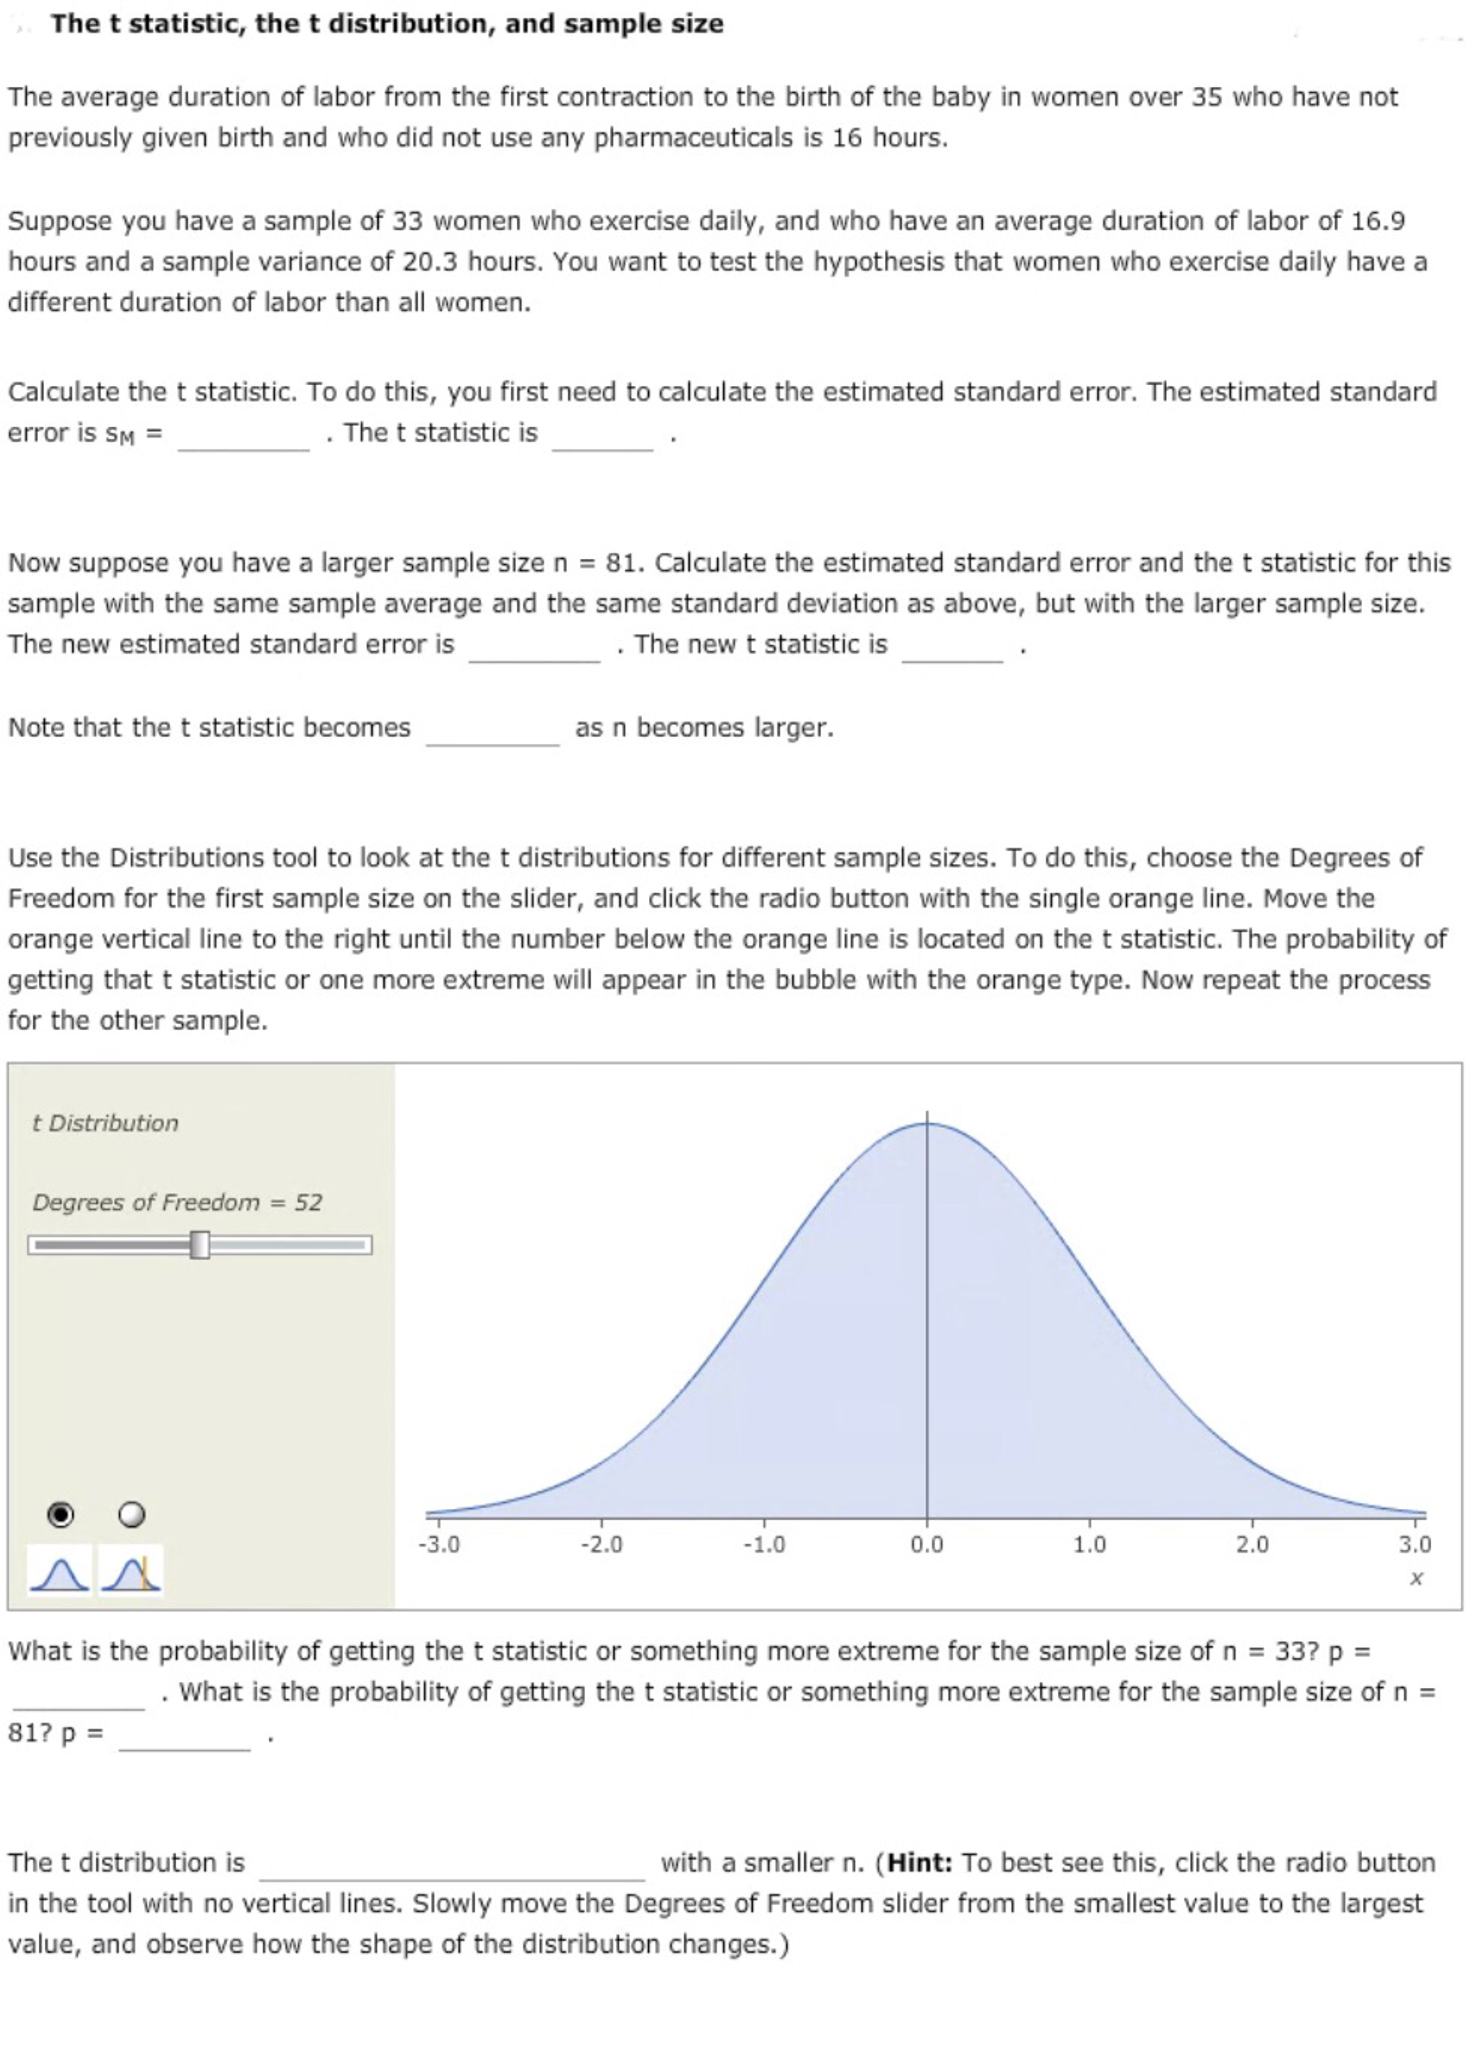 Solved The t statistic, the t distribution, and sample size